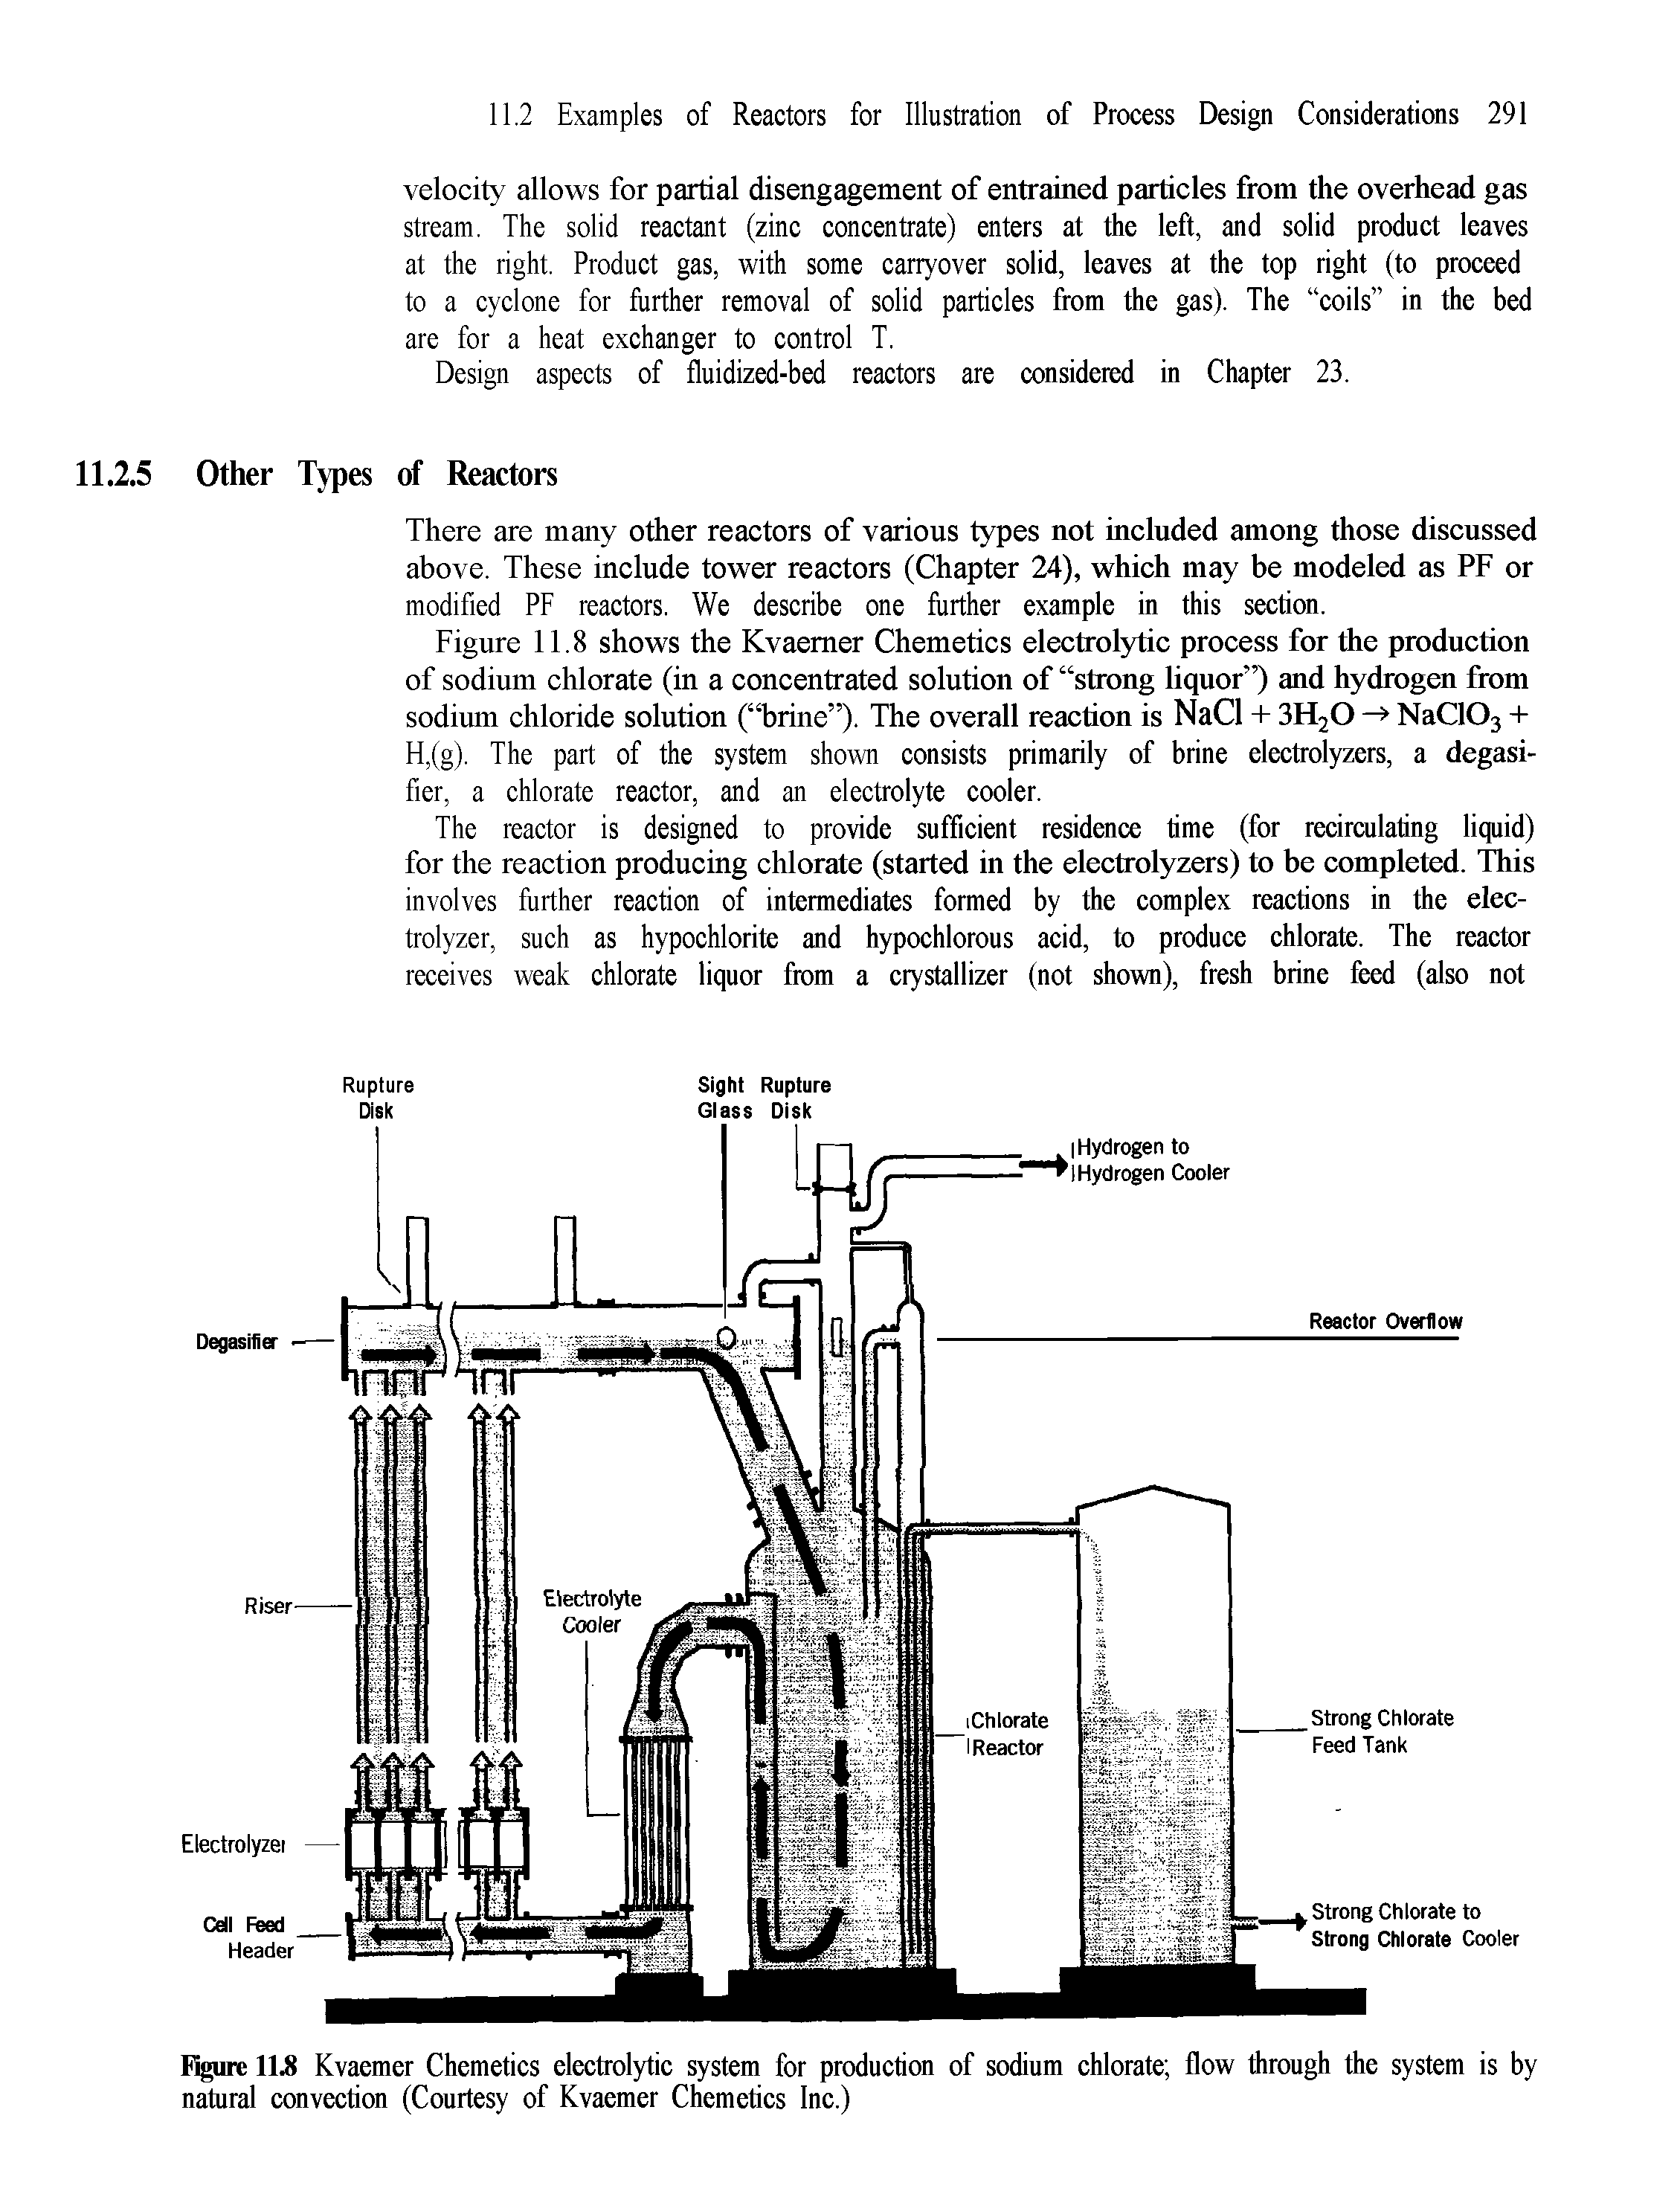 Figure 11.8 Kvaemer Chemetics electrolytic system for production of sodium chlorate flow through the system is by natural convection (Courtesy of Kvaemer Chemetics Inc.)...